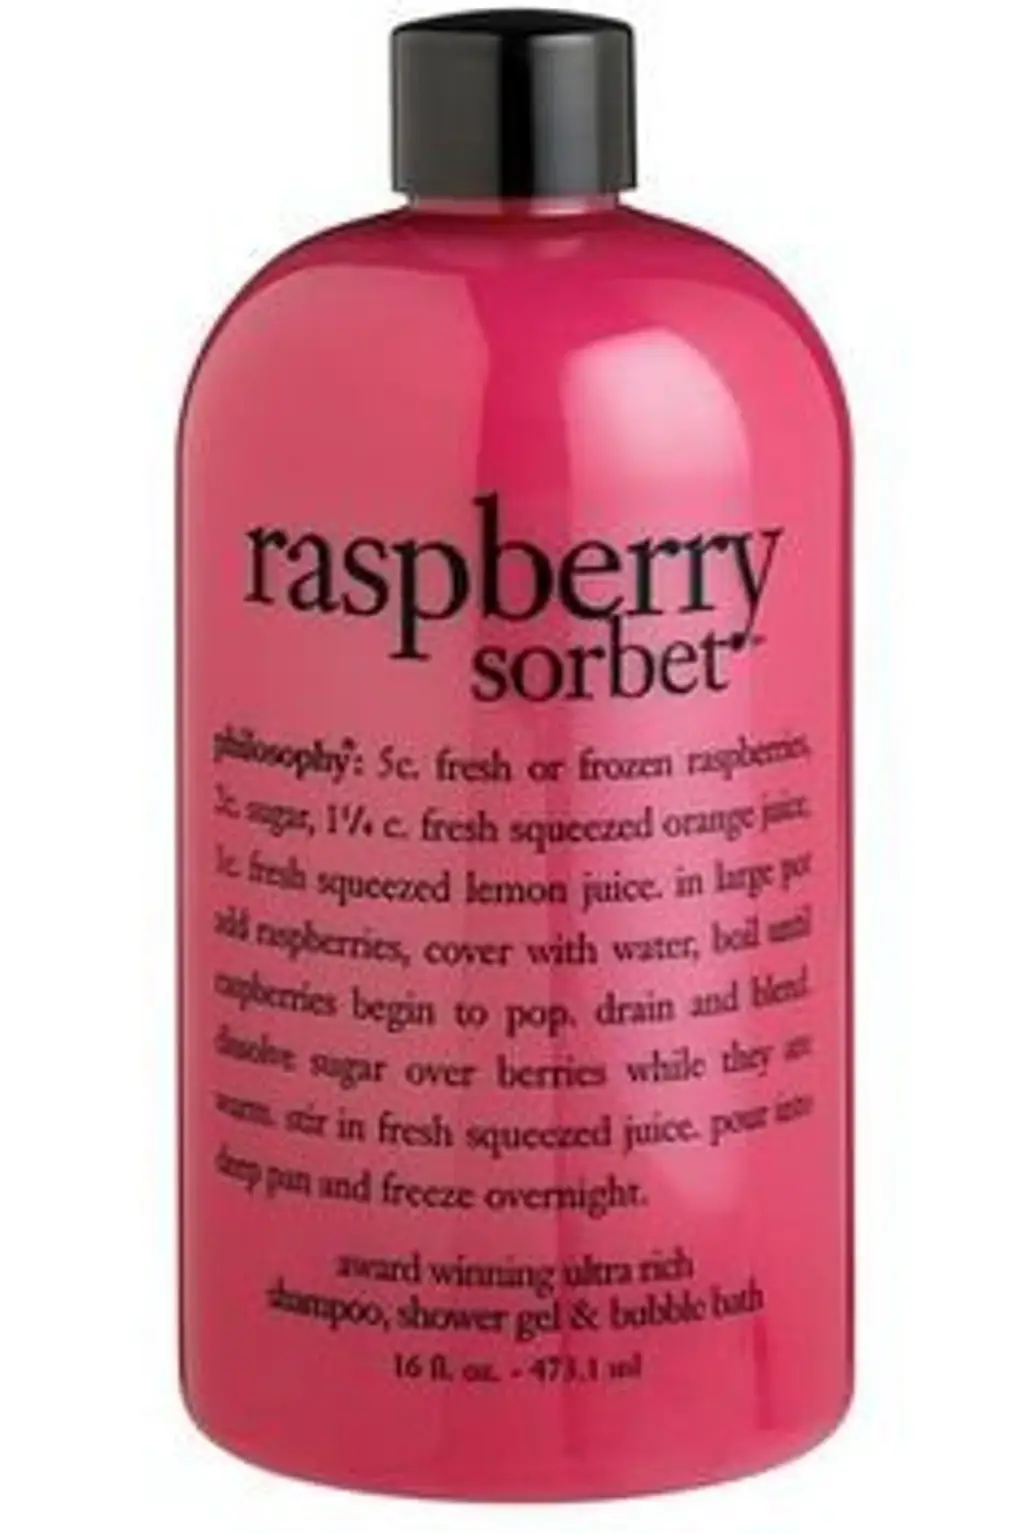 Get Sparkling Clean with Philosophy’s Raspberry Sorbet Shampoo, Shower Gel and Bubble Bath